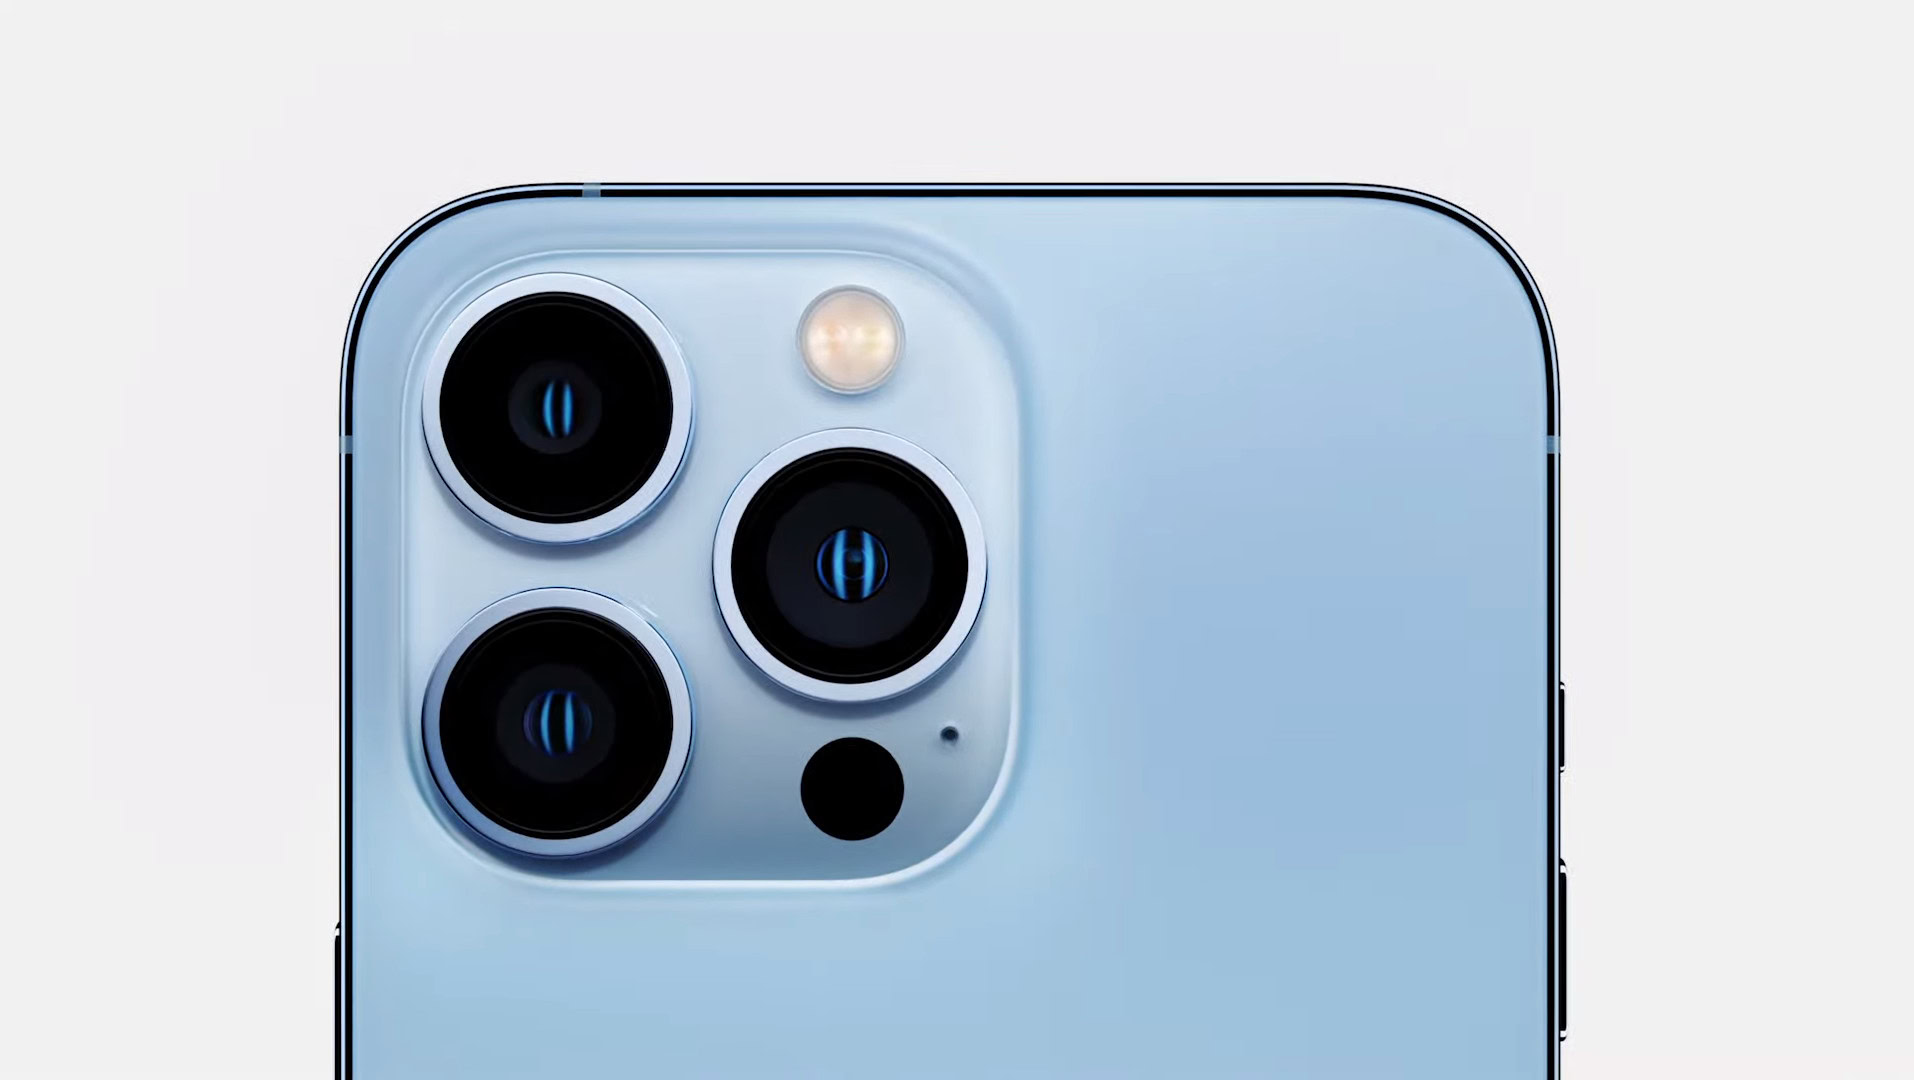 iPhone 13 Pro back cameras